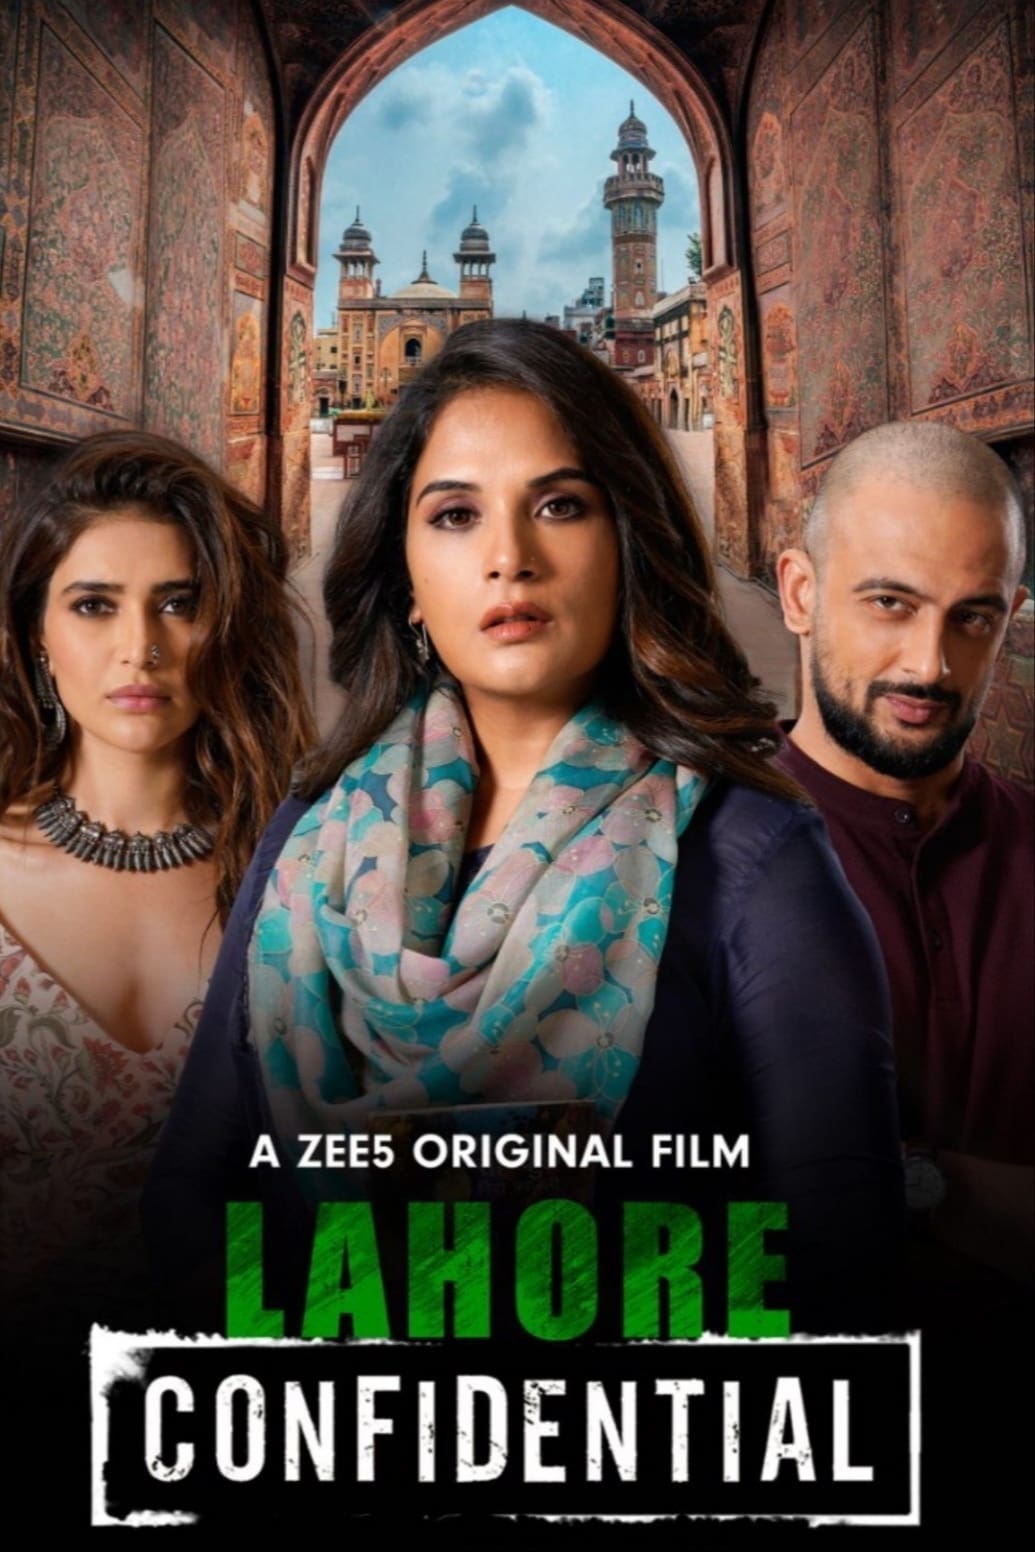 Poster for the movie "Lahore Confidential"